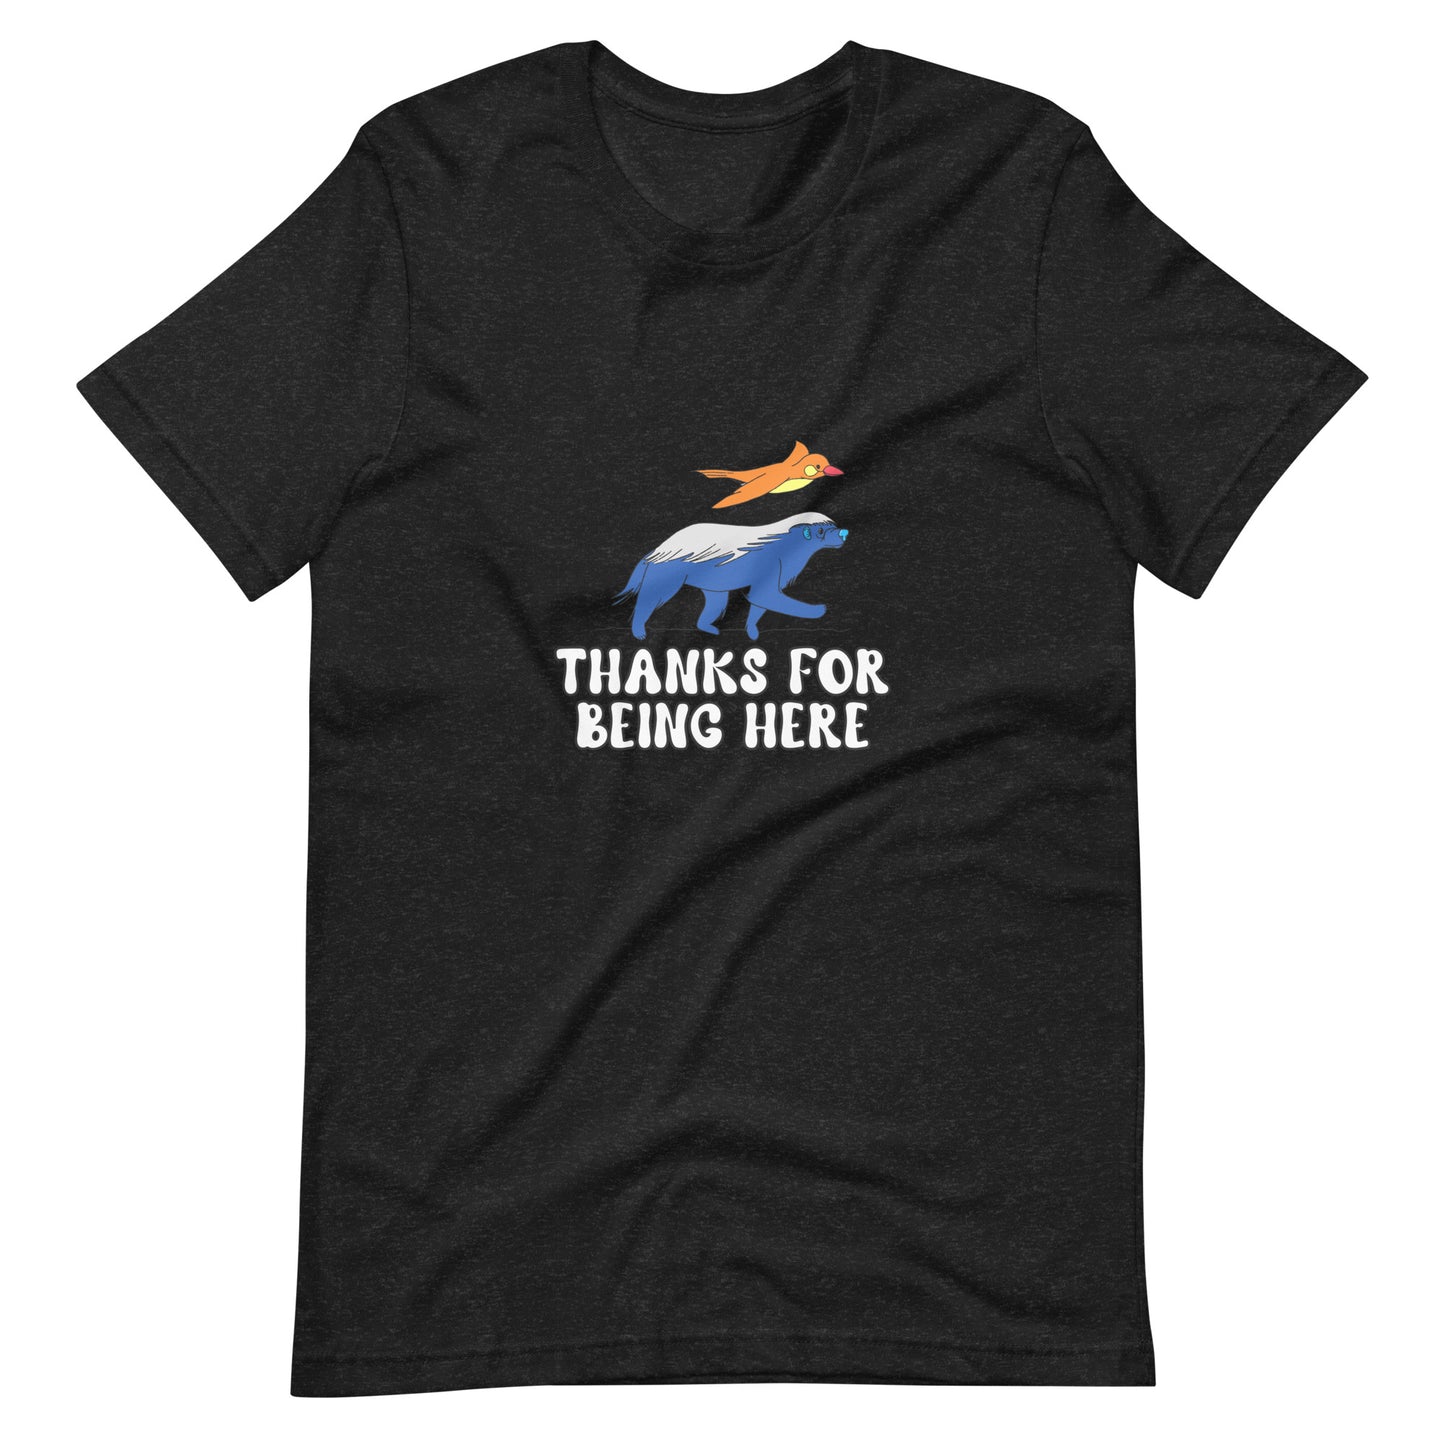 THANKS FOR BEING HERE Tshirt